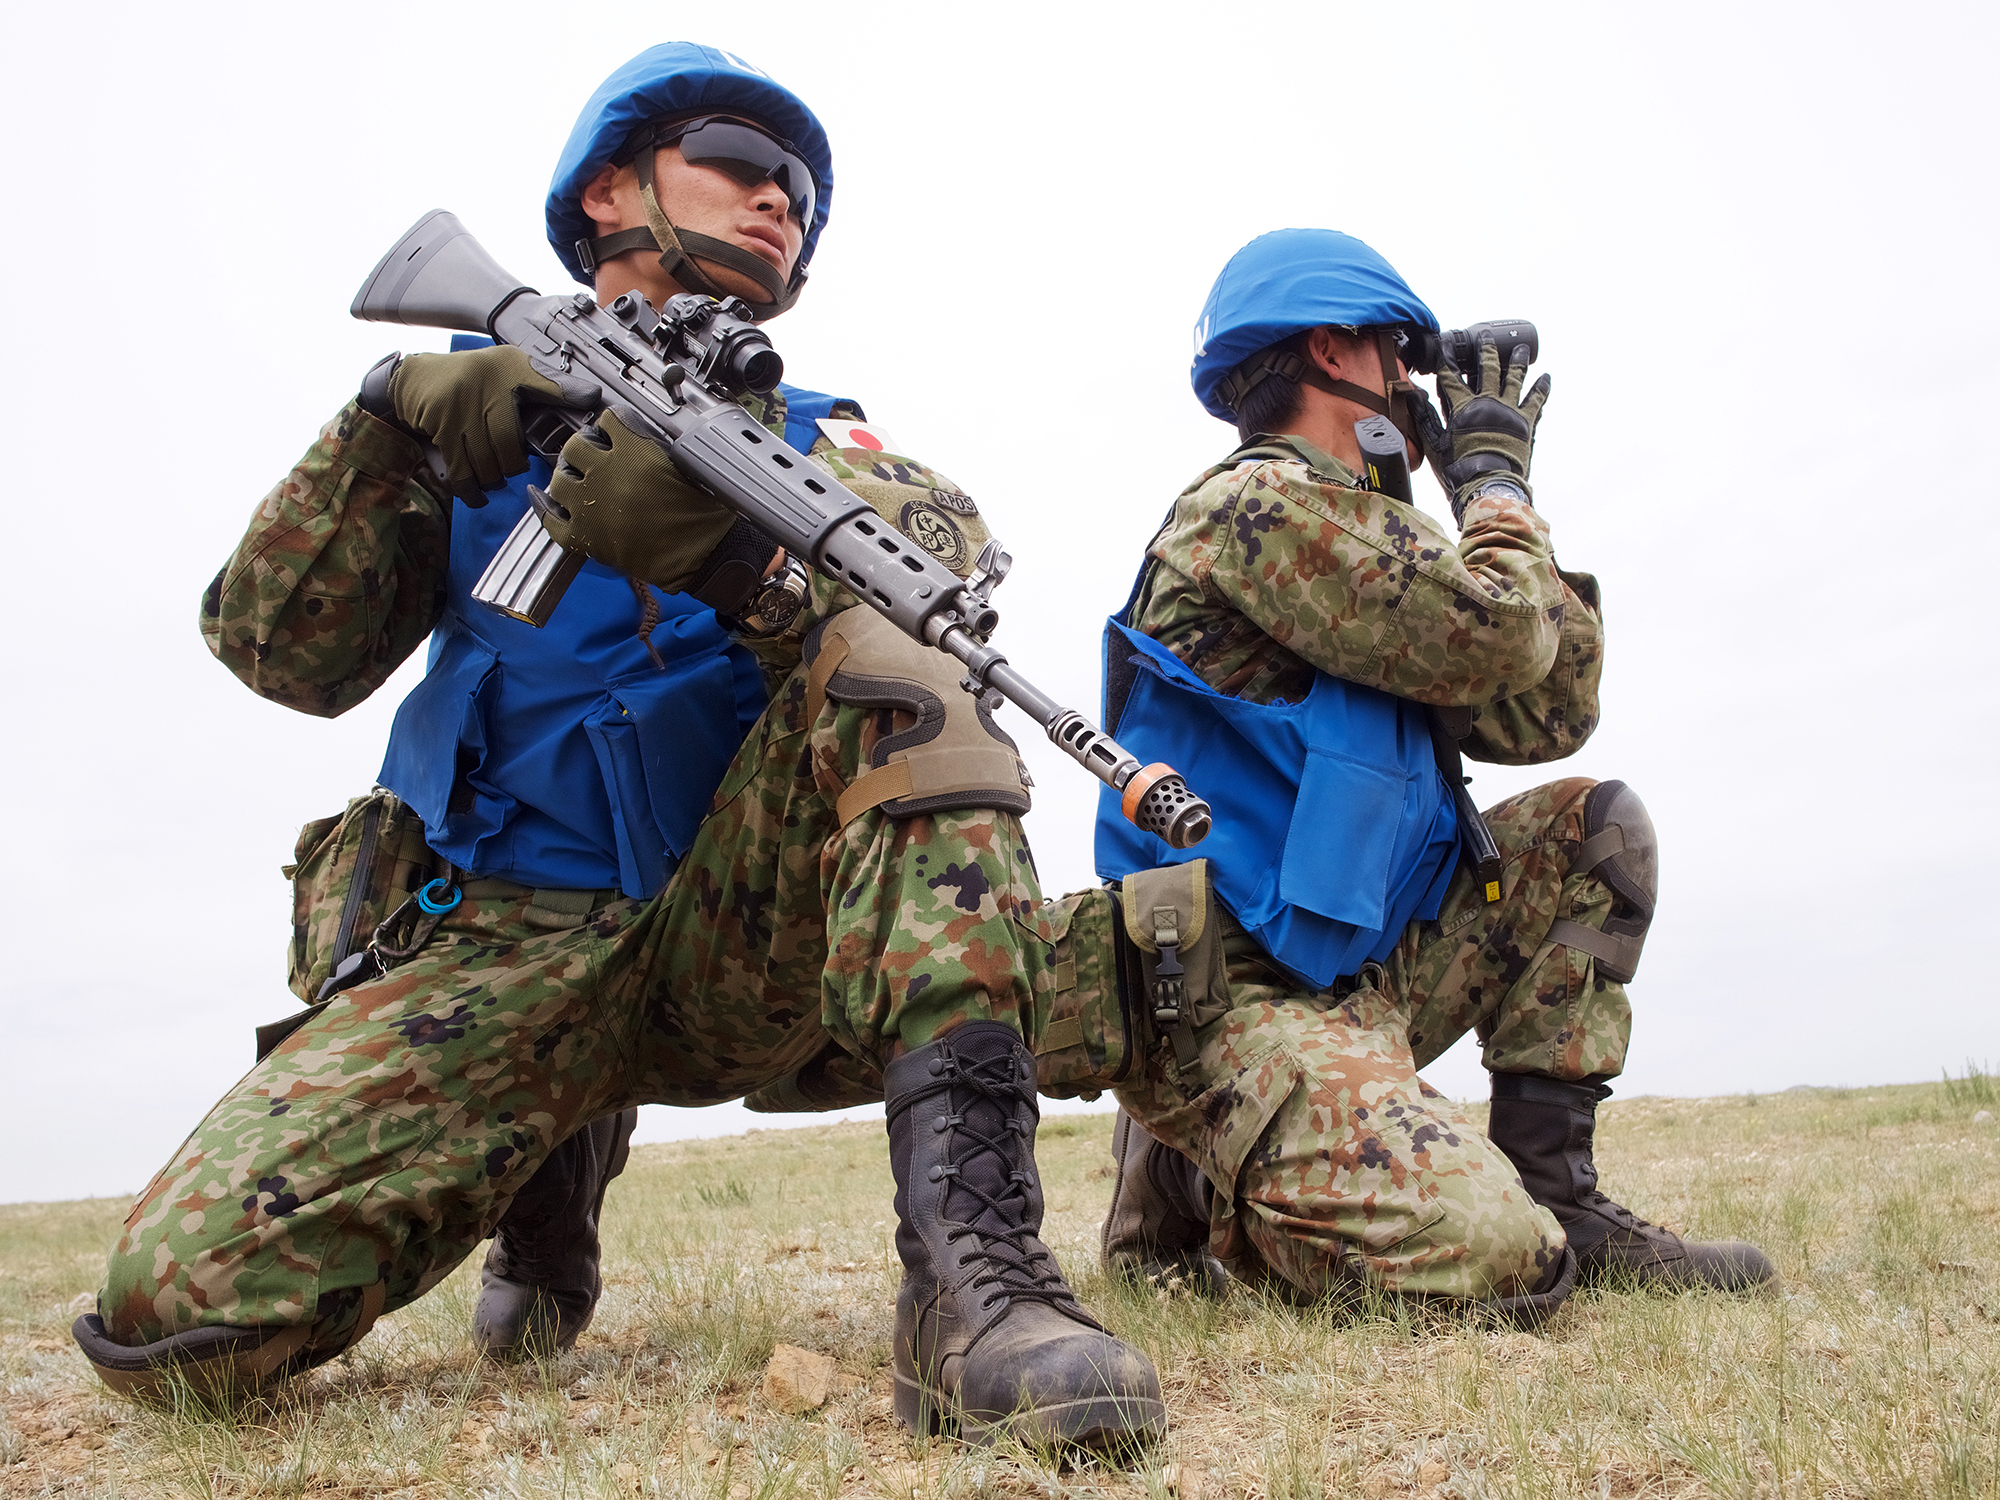 Japan Ground Self-Defense Force soldiers train for UN patrolling in